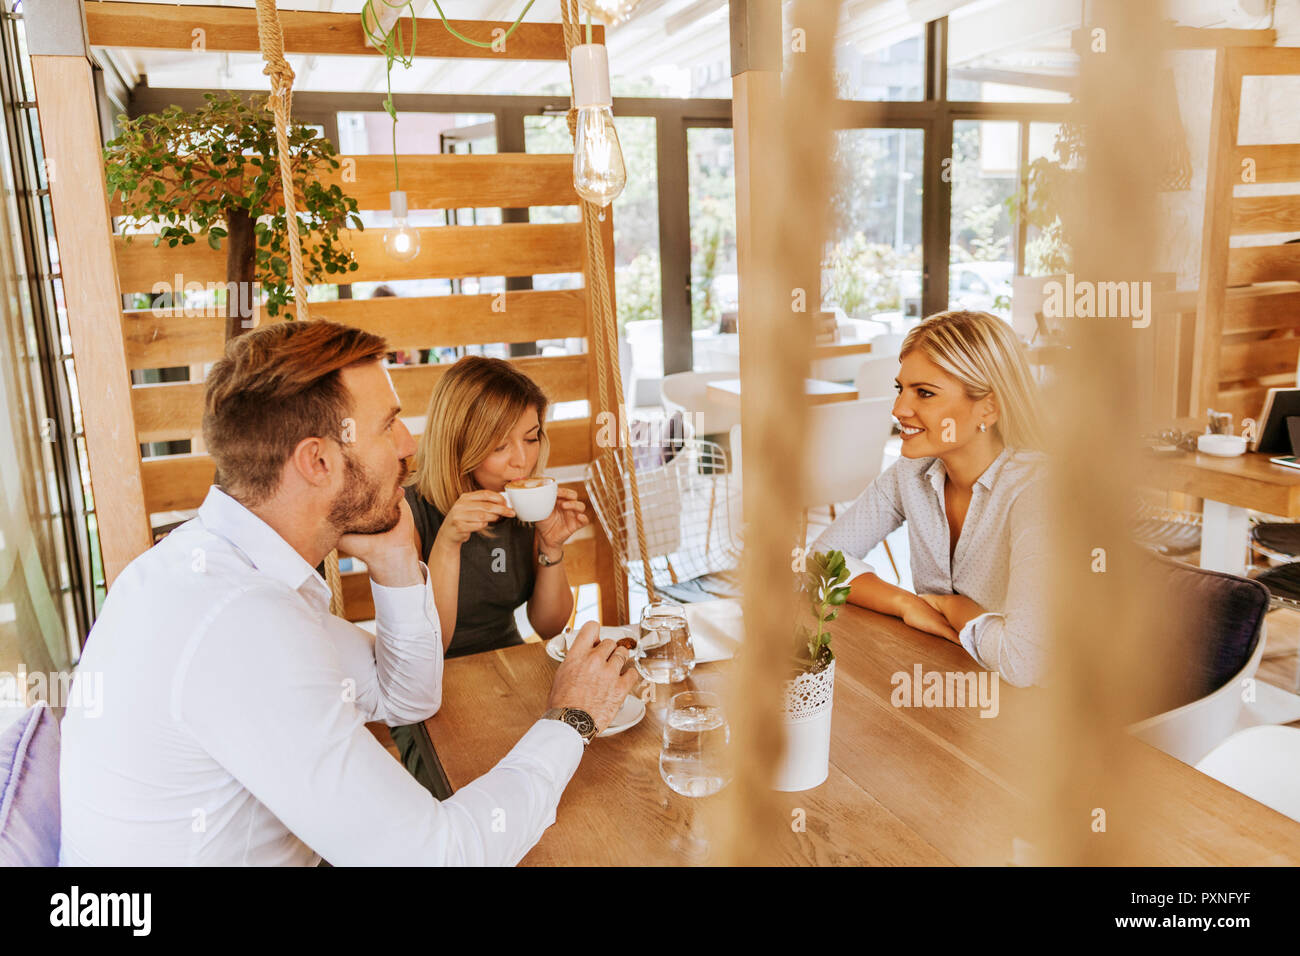 Three friends meeting in a cafe Stock Photo